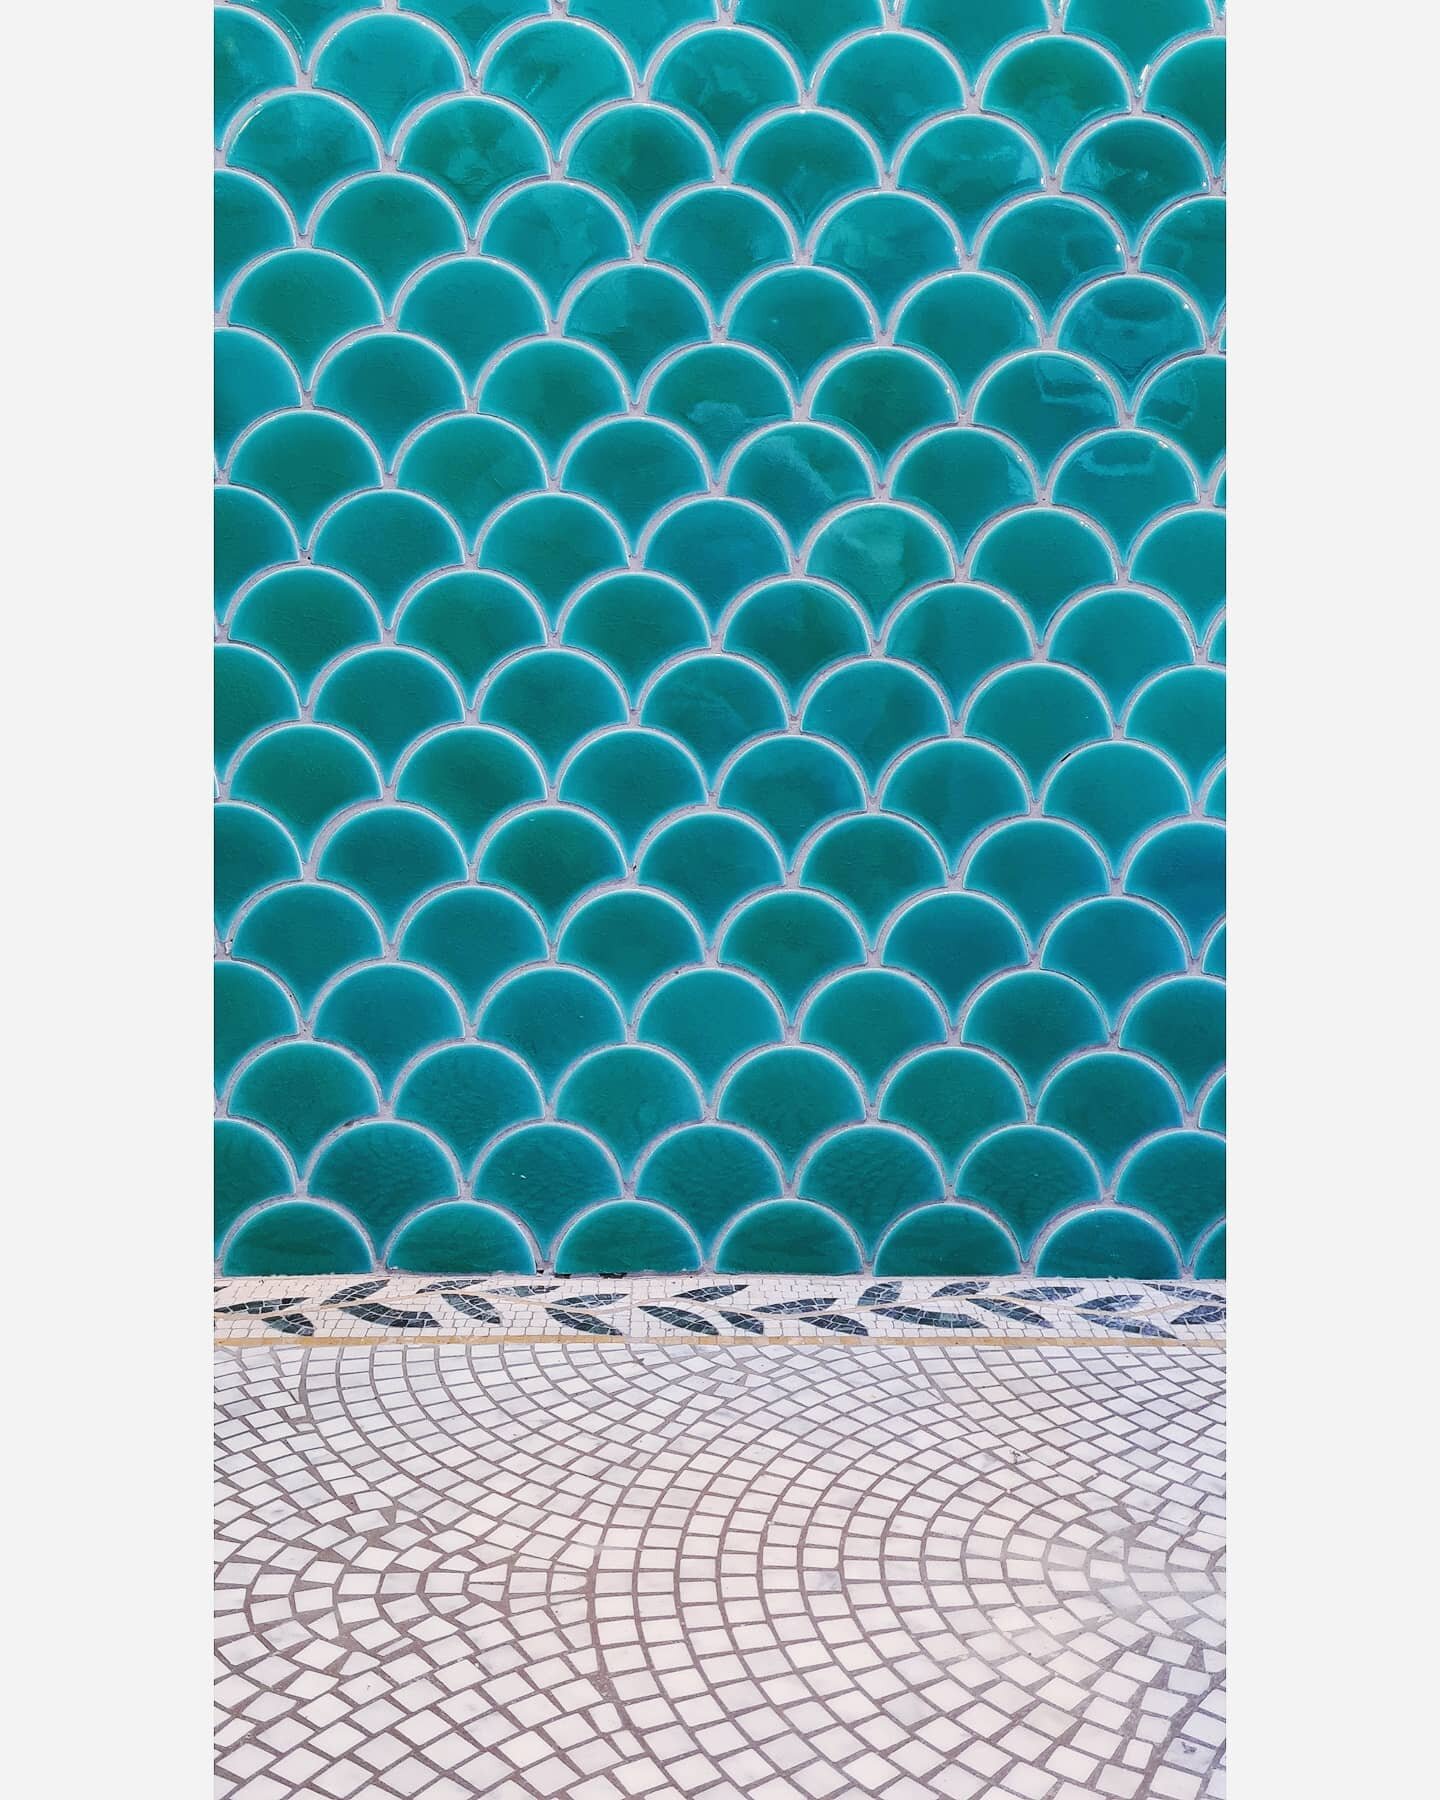 Tile P*RN. 

Authentic. Timeless. Creative.

Recently during a short time we closed we did some renovations just before our 1 anniversary week. We added teal green tiles to our lower wall, re-rendered all the other walls and had some extra shelves in